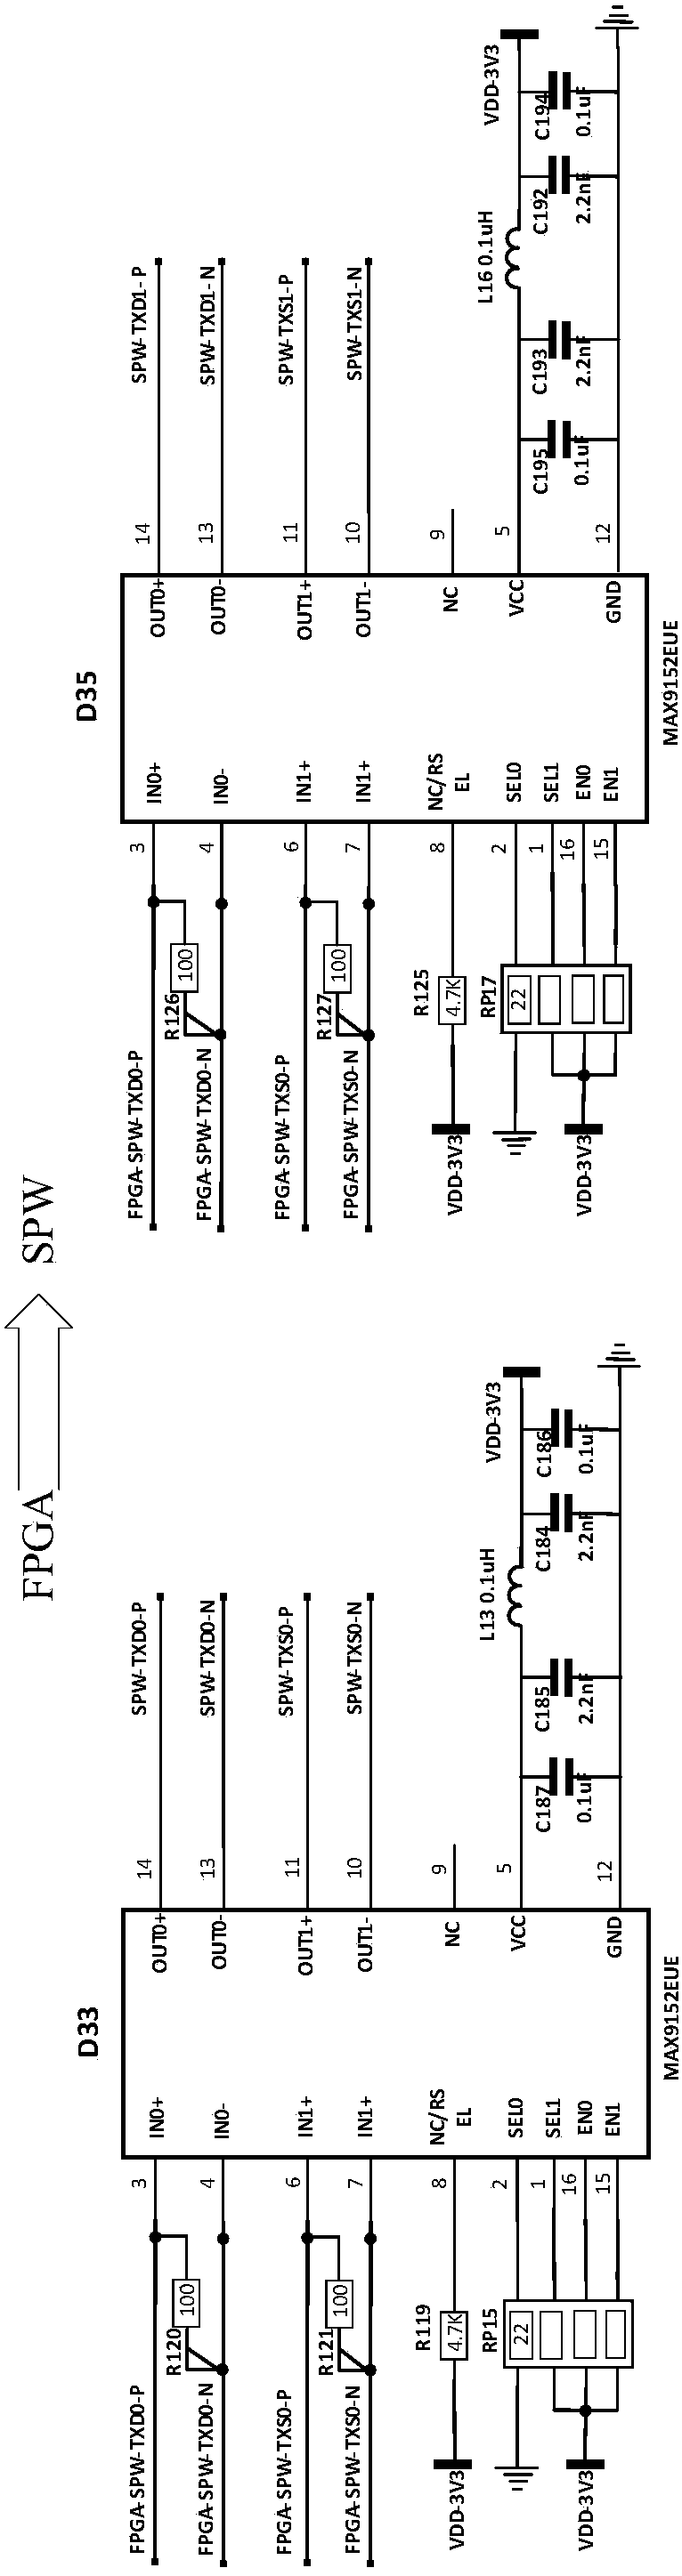 A high-speed large data volume information processing system